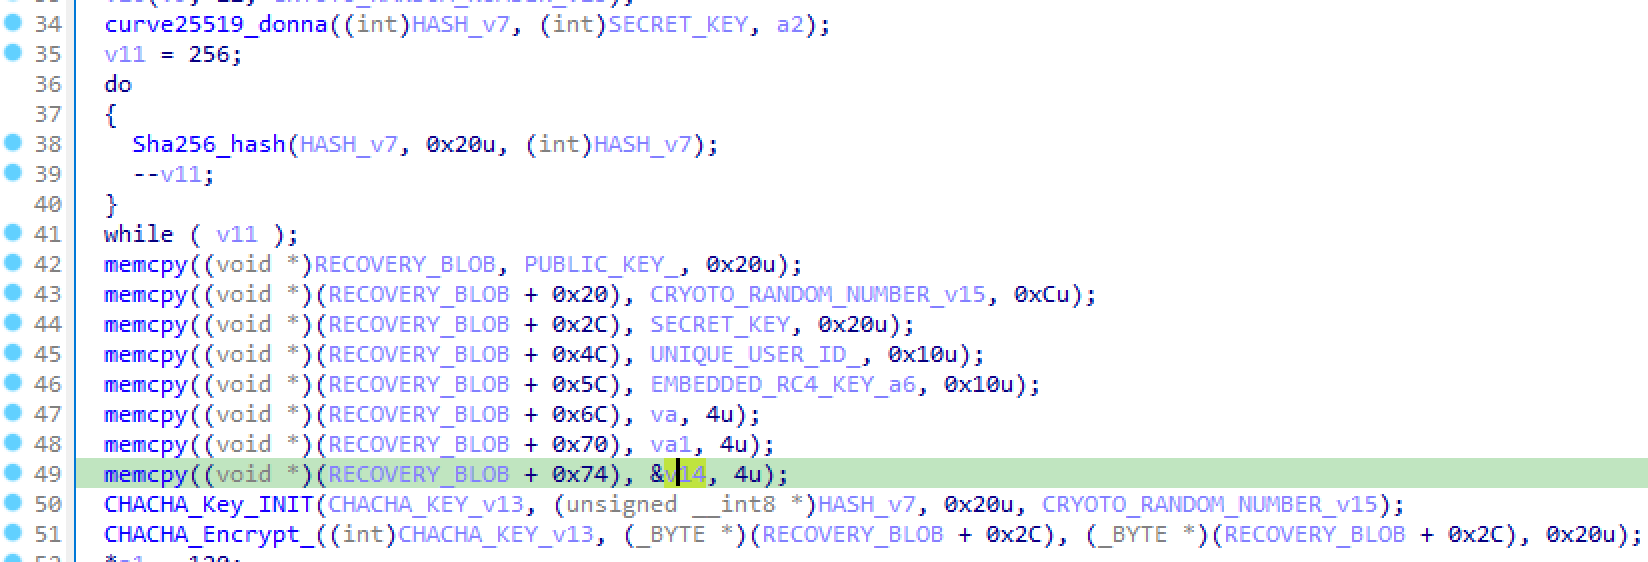 The RECOVERY BLOB is encrypted with ChaCha20 as shown and stored in HKCU\Software\<32-byte ID >\RECOVERY